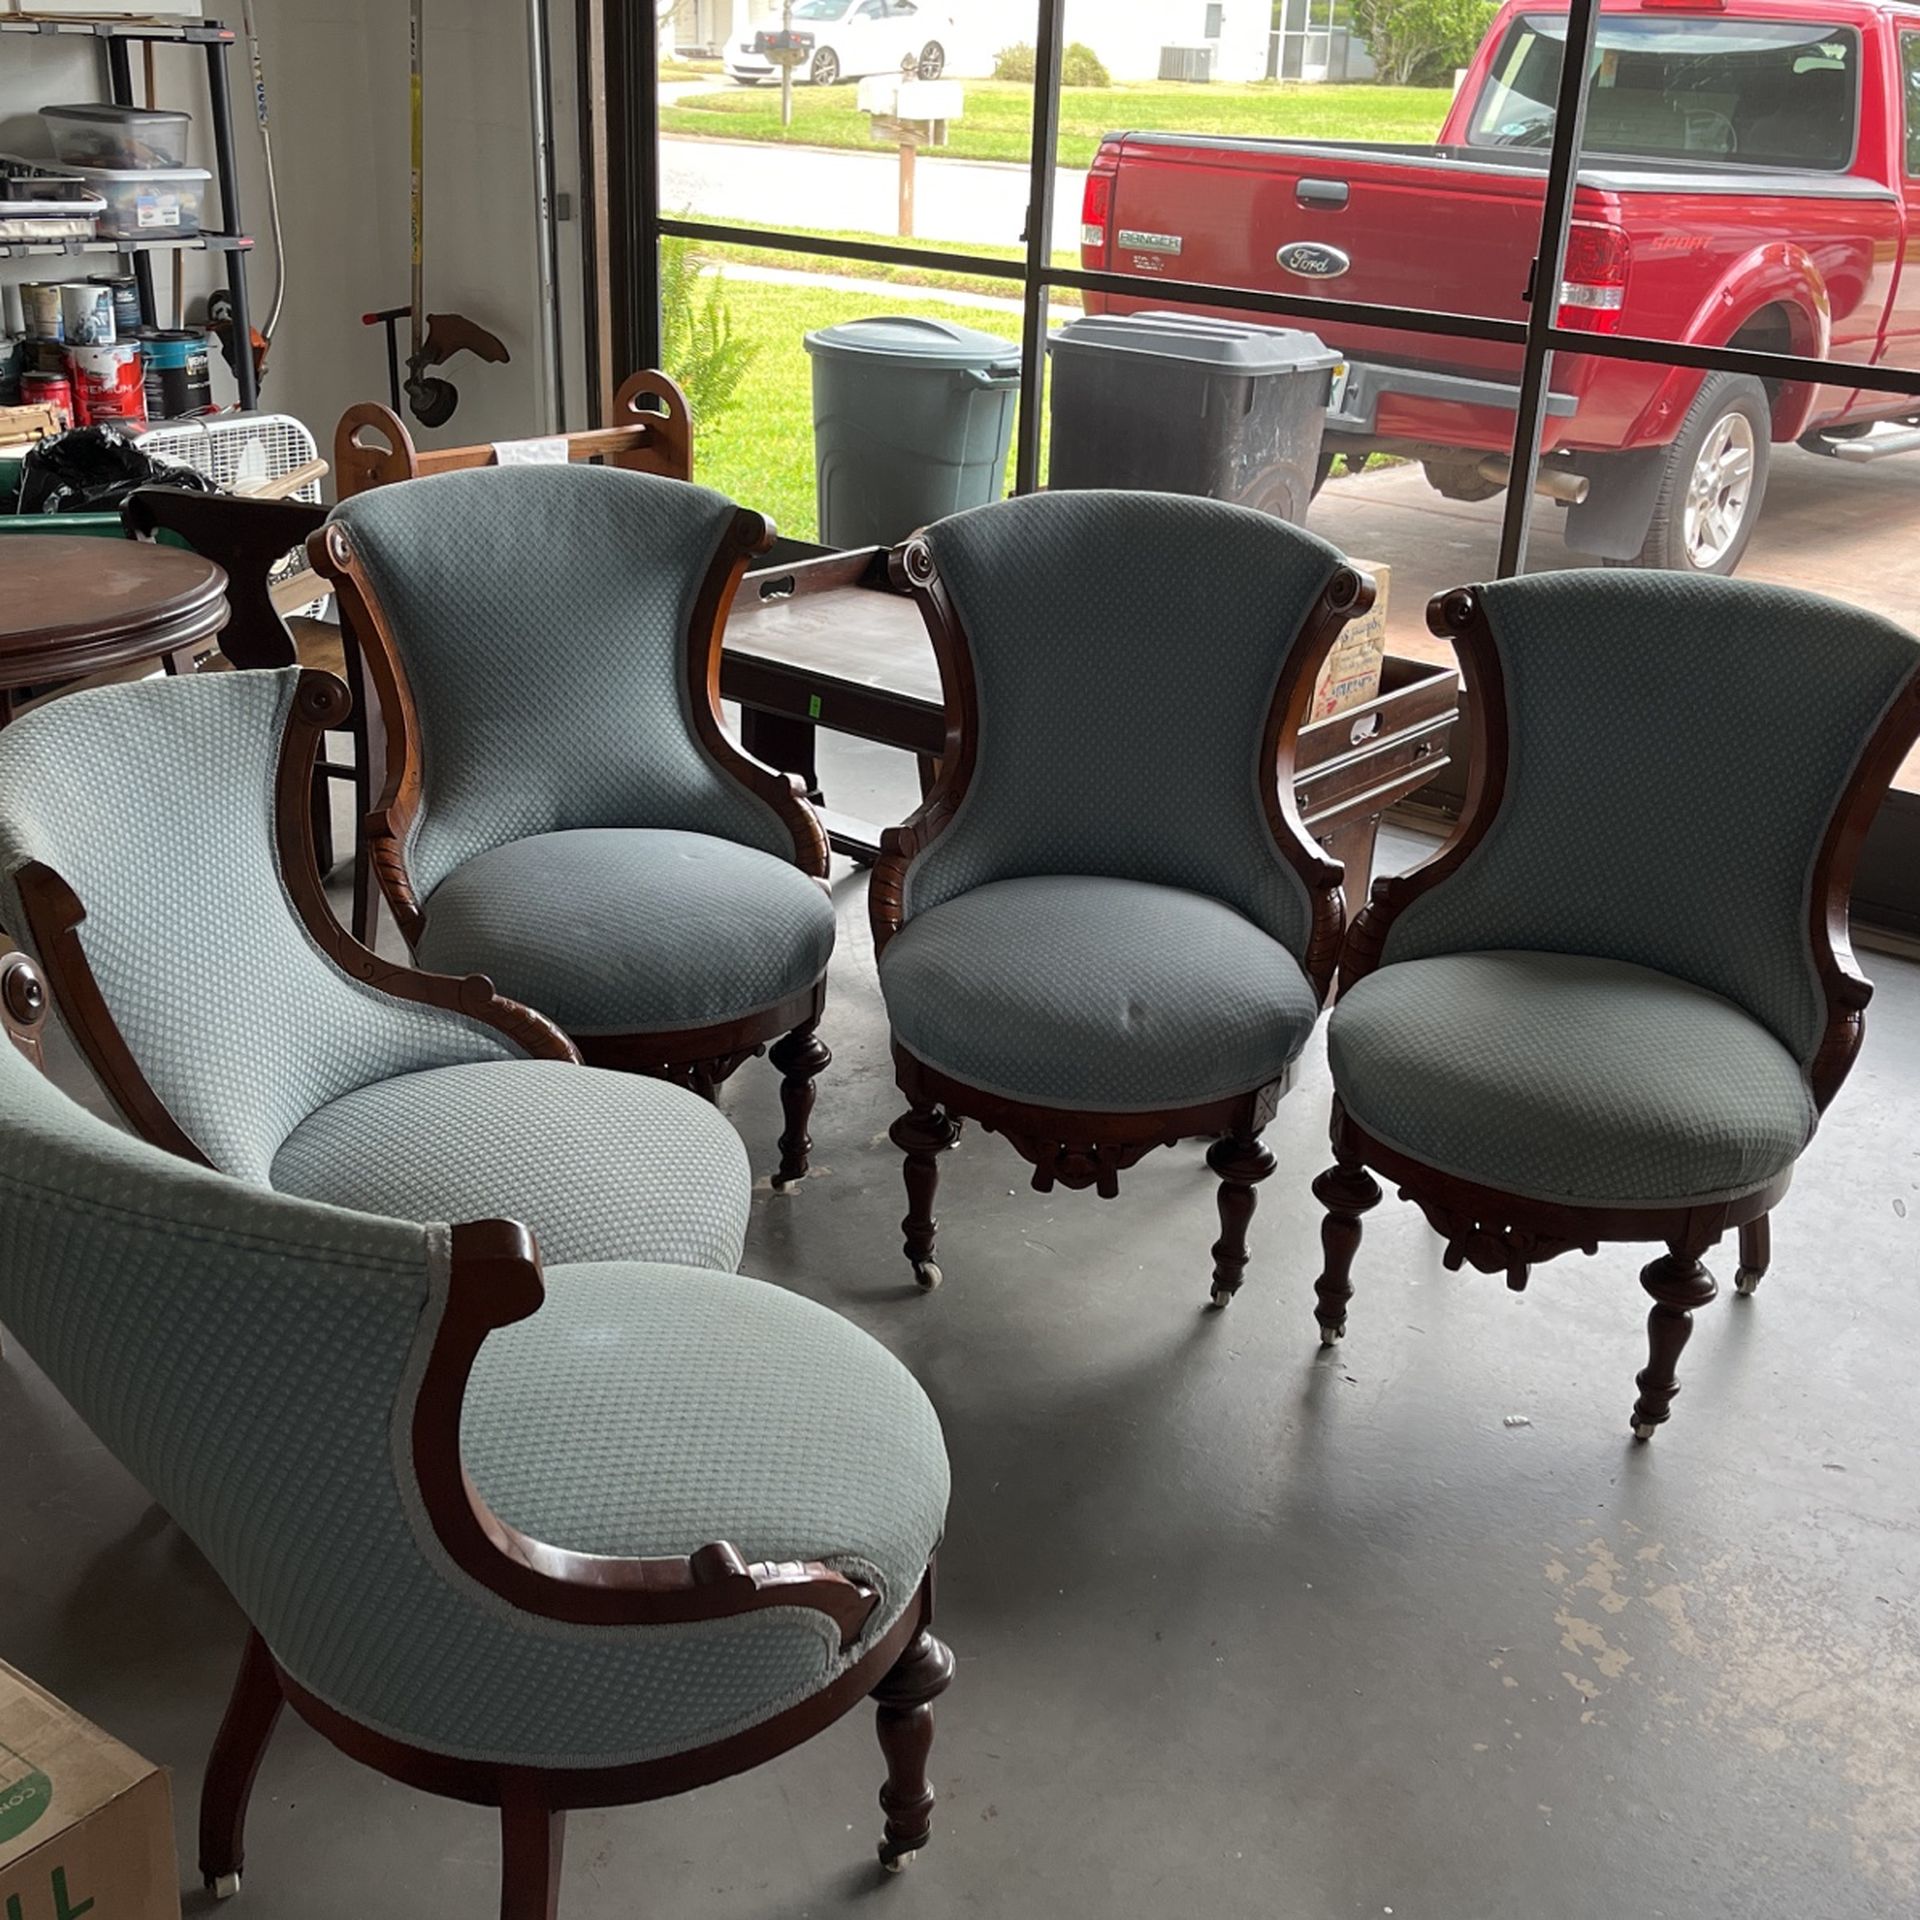 Must go! Reduced to $100 dollars each or all five $400.  Mid To Late 1800S, Five Piece Parlor Set